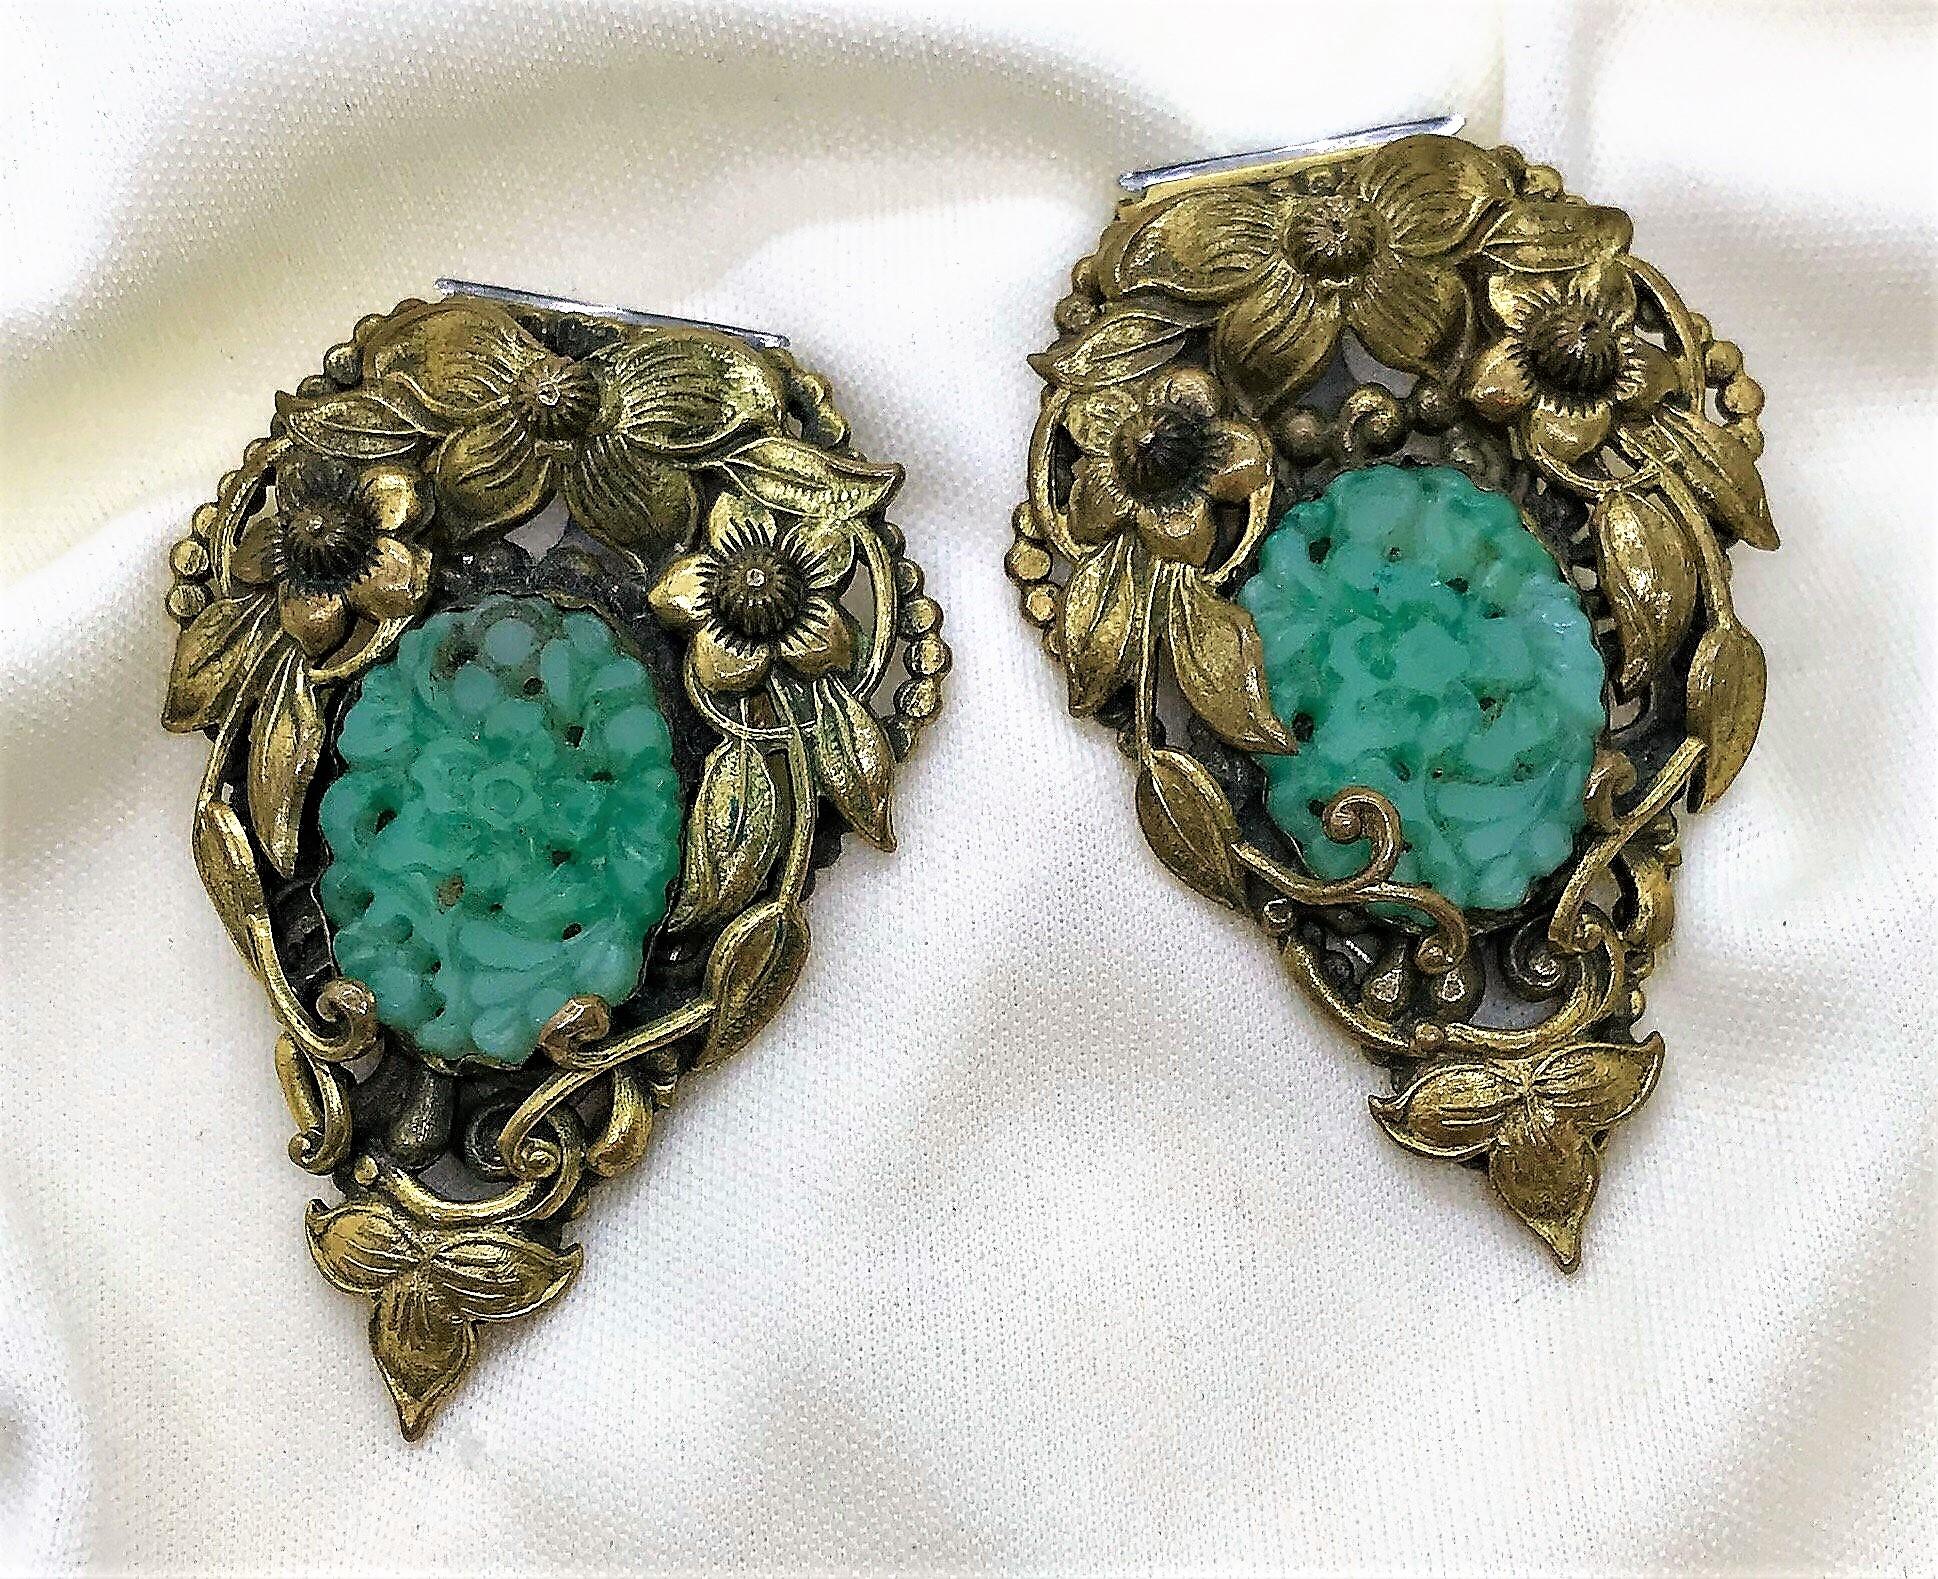 Circa 1930 Goldtone Floral Dress Clips Set With Molded Jade Green Glass, Pair In Good Condition For Sale In Long Beach, CA